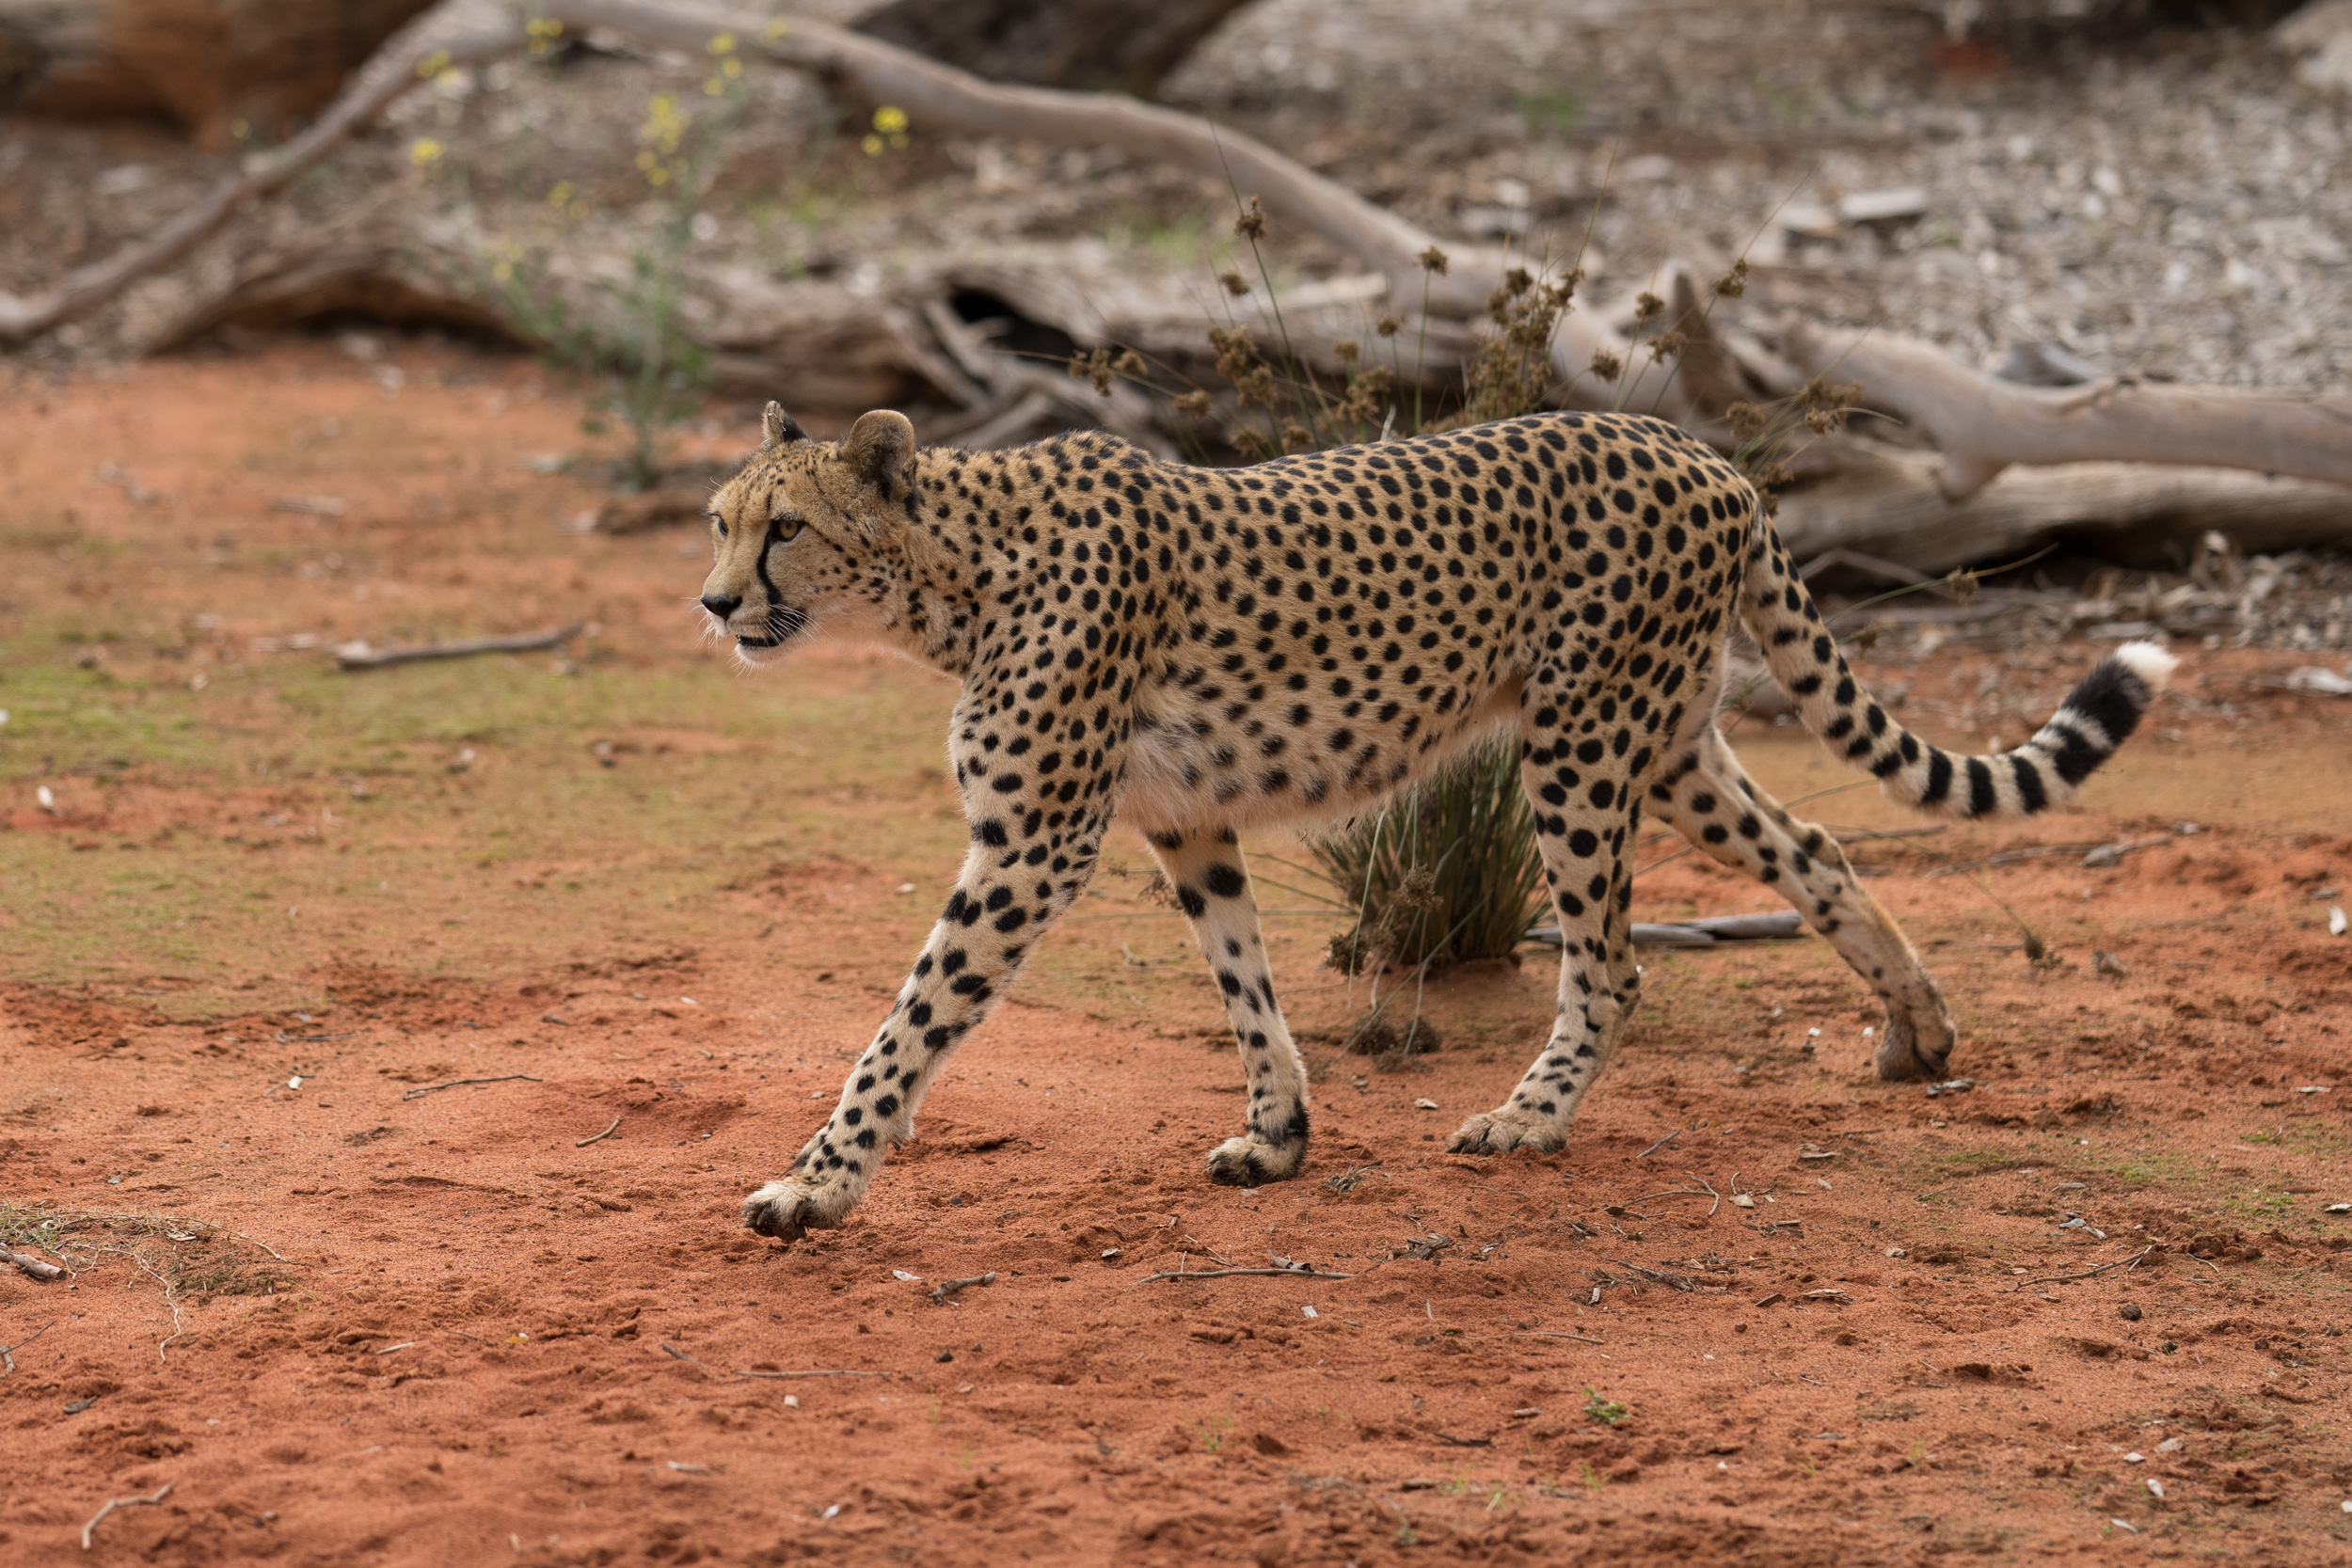 Cheetah prowling – the A1 at work